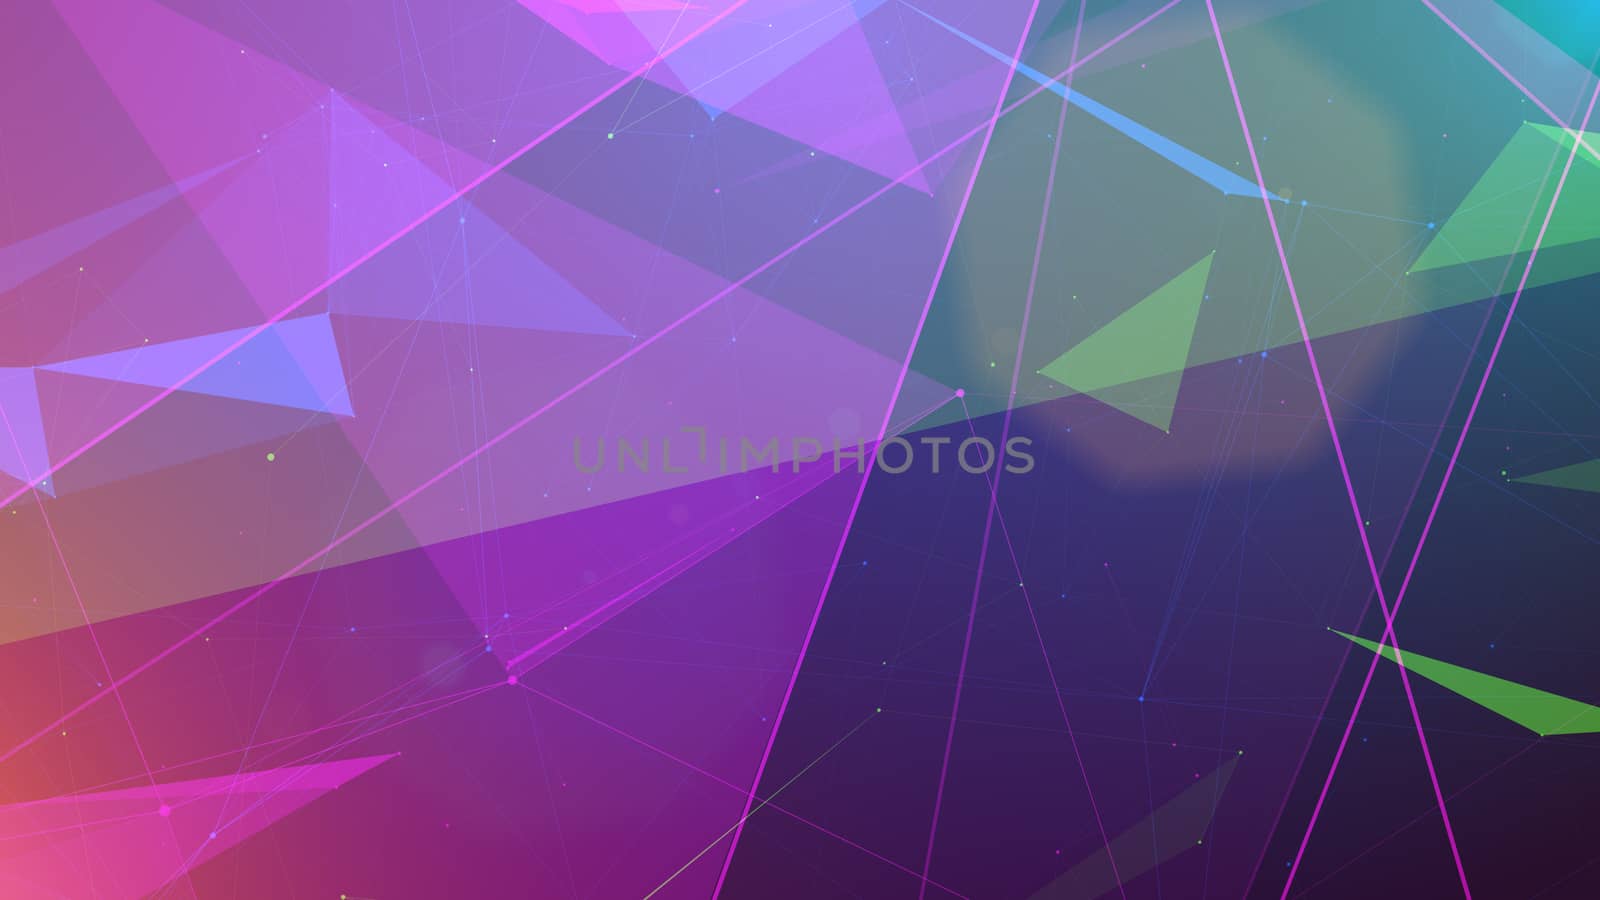 A striking 3d rendering of green and pink pyramid shapes covered with triangular surfaces shining enigmatically in the dark blue universe with star looking dots.